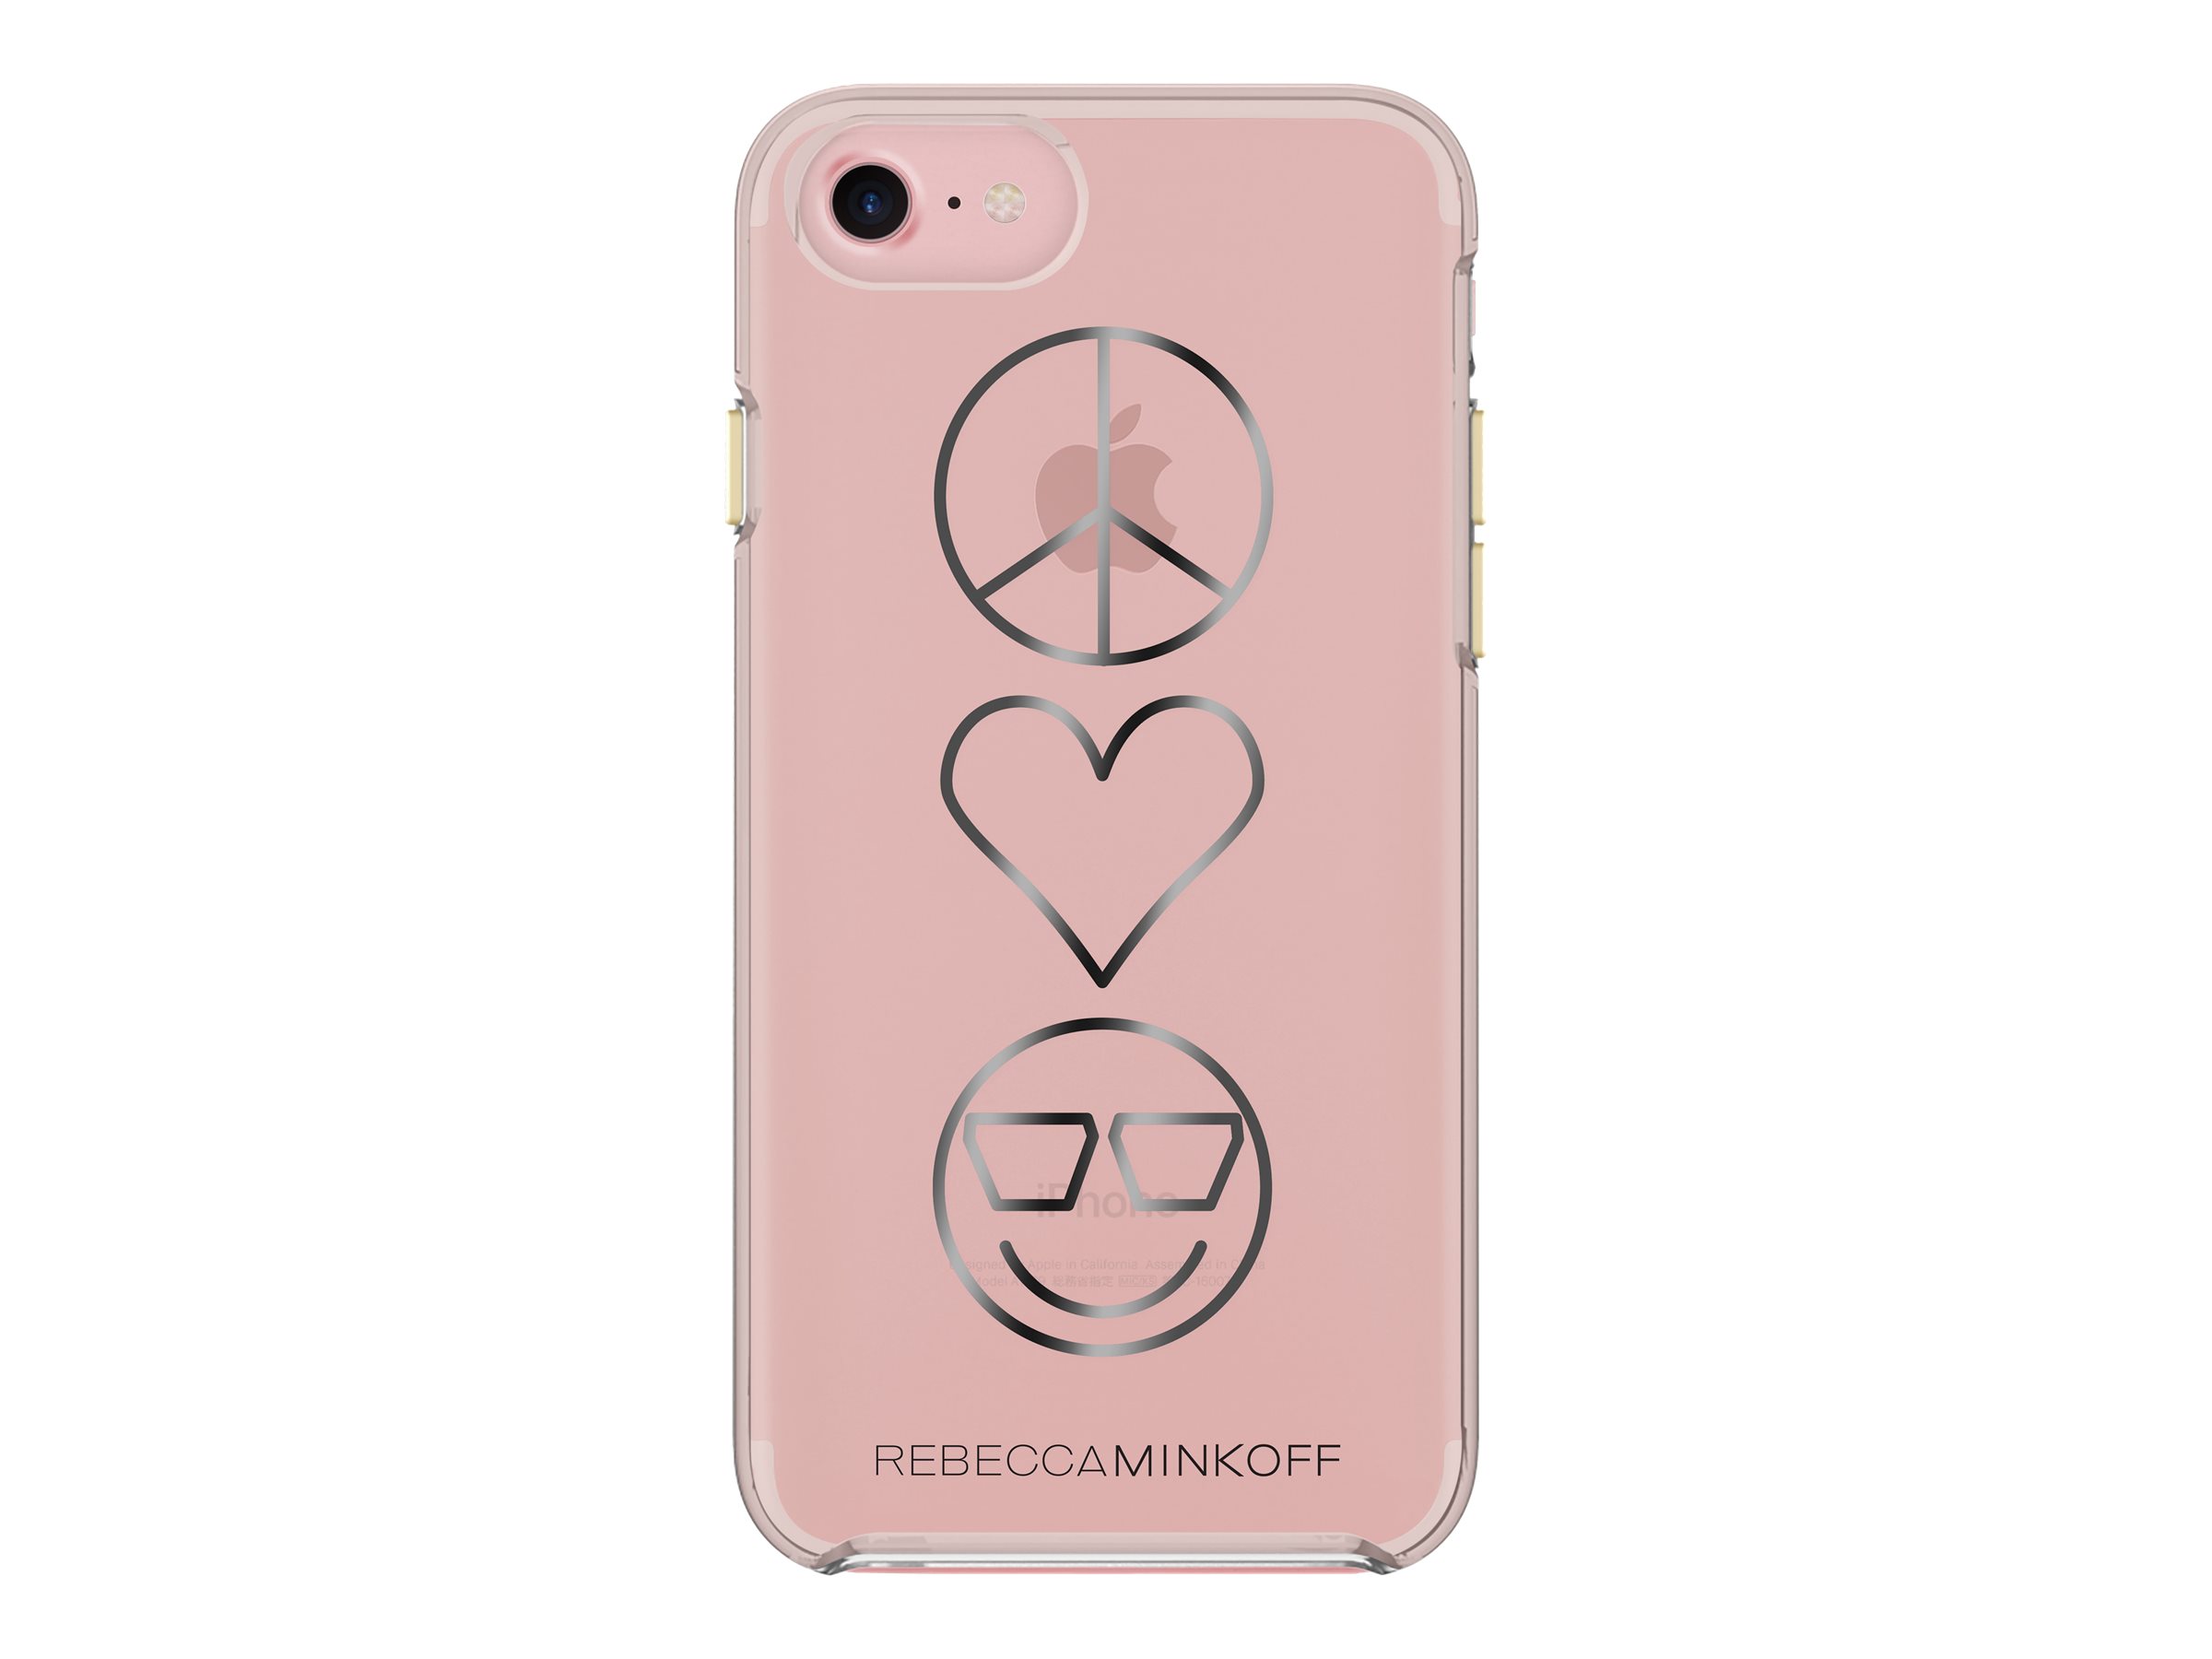 Incipio Rebecca Minkoff Double Up Protection Case - Back cover for cell phone - metallic, Peace, Love, Happiness clear, transparent rose gold, black foil - image 1 of 7